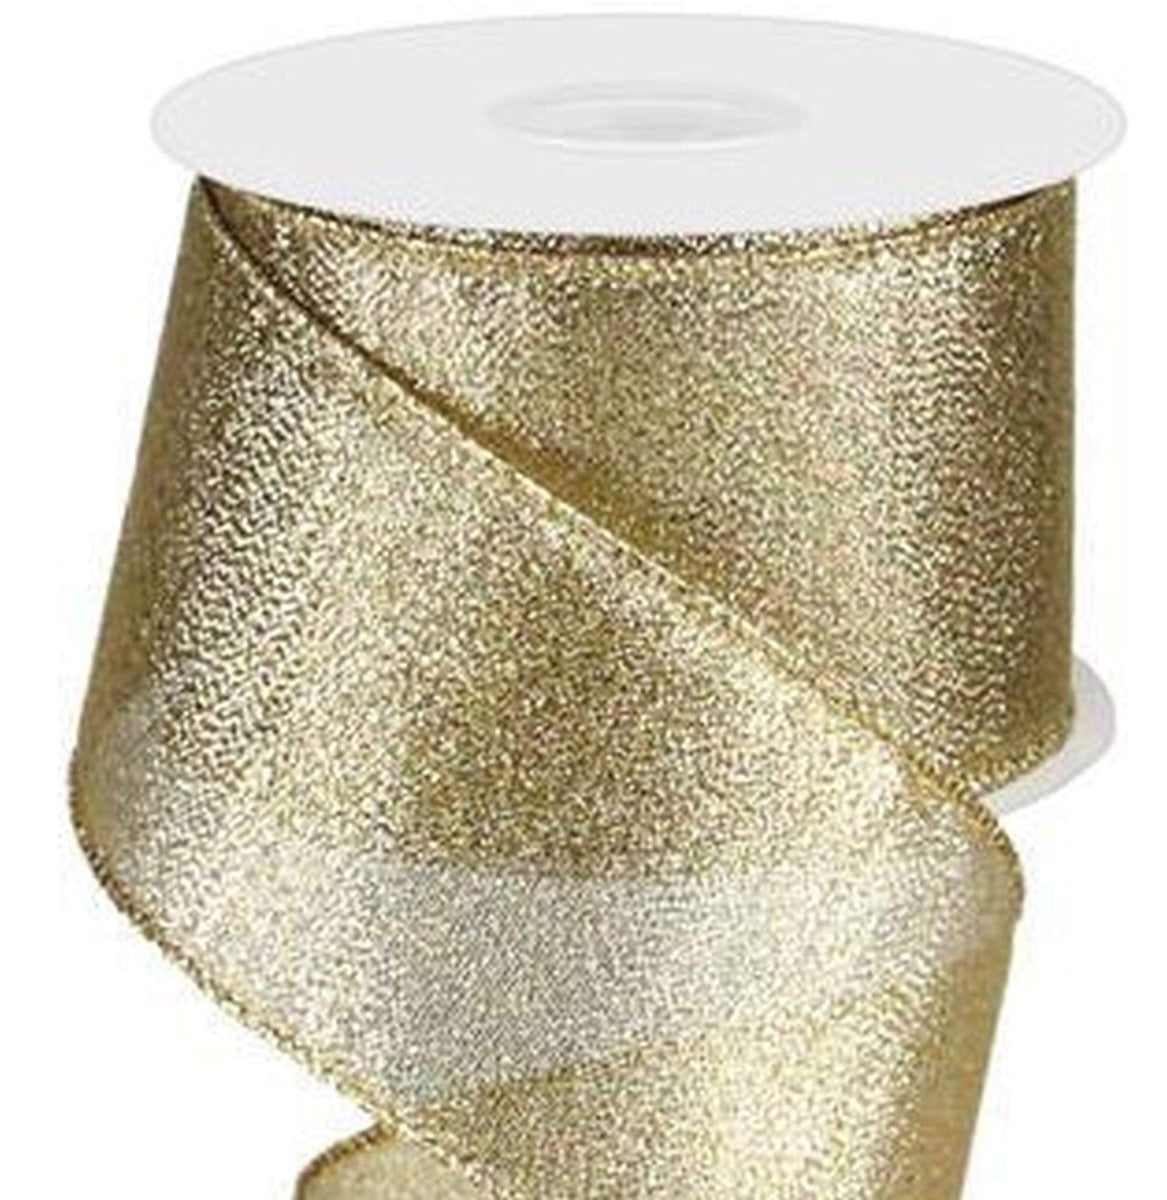 2.5 inch Wired Cream Ribbon with Metallic Gold Dots - 5 Yards